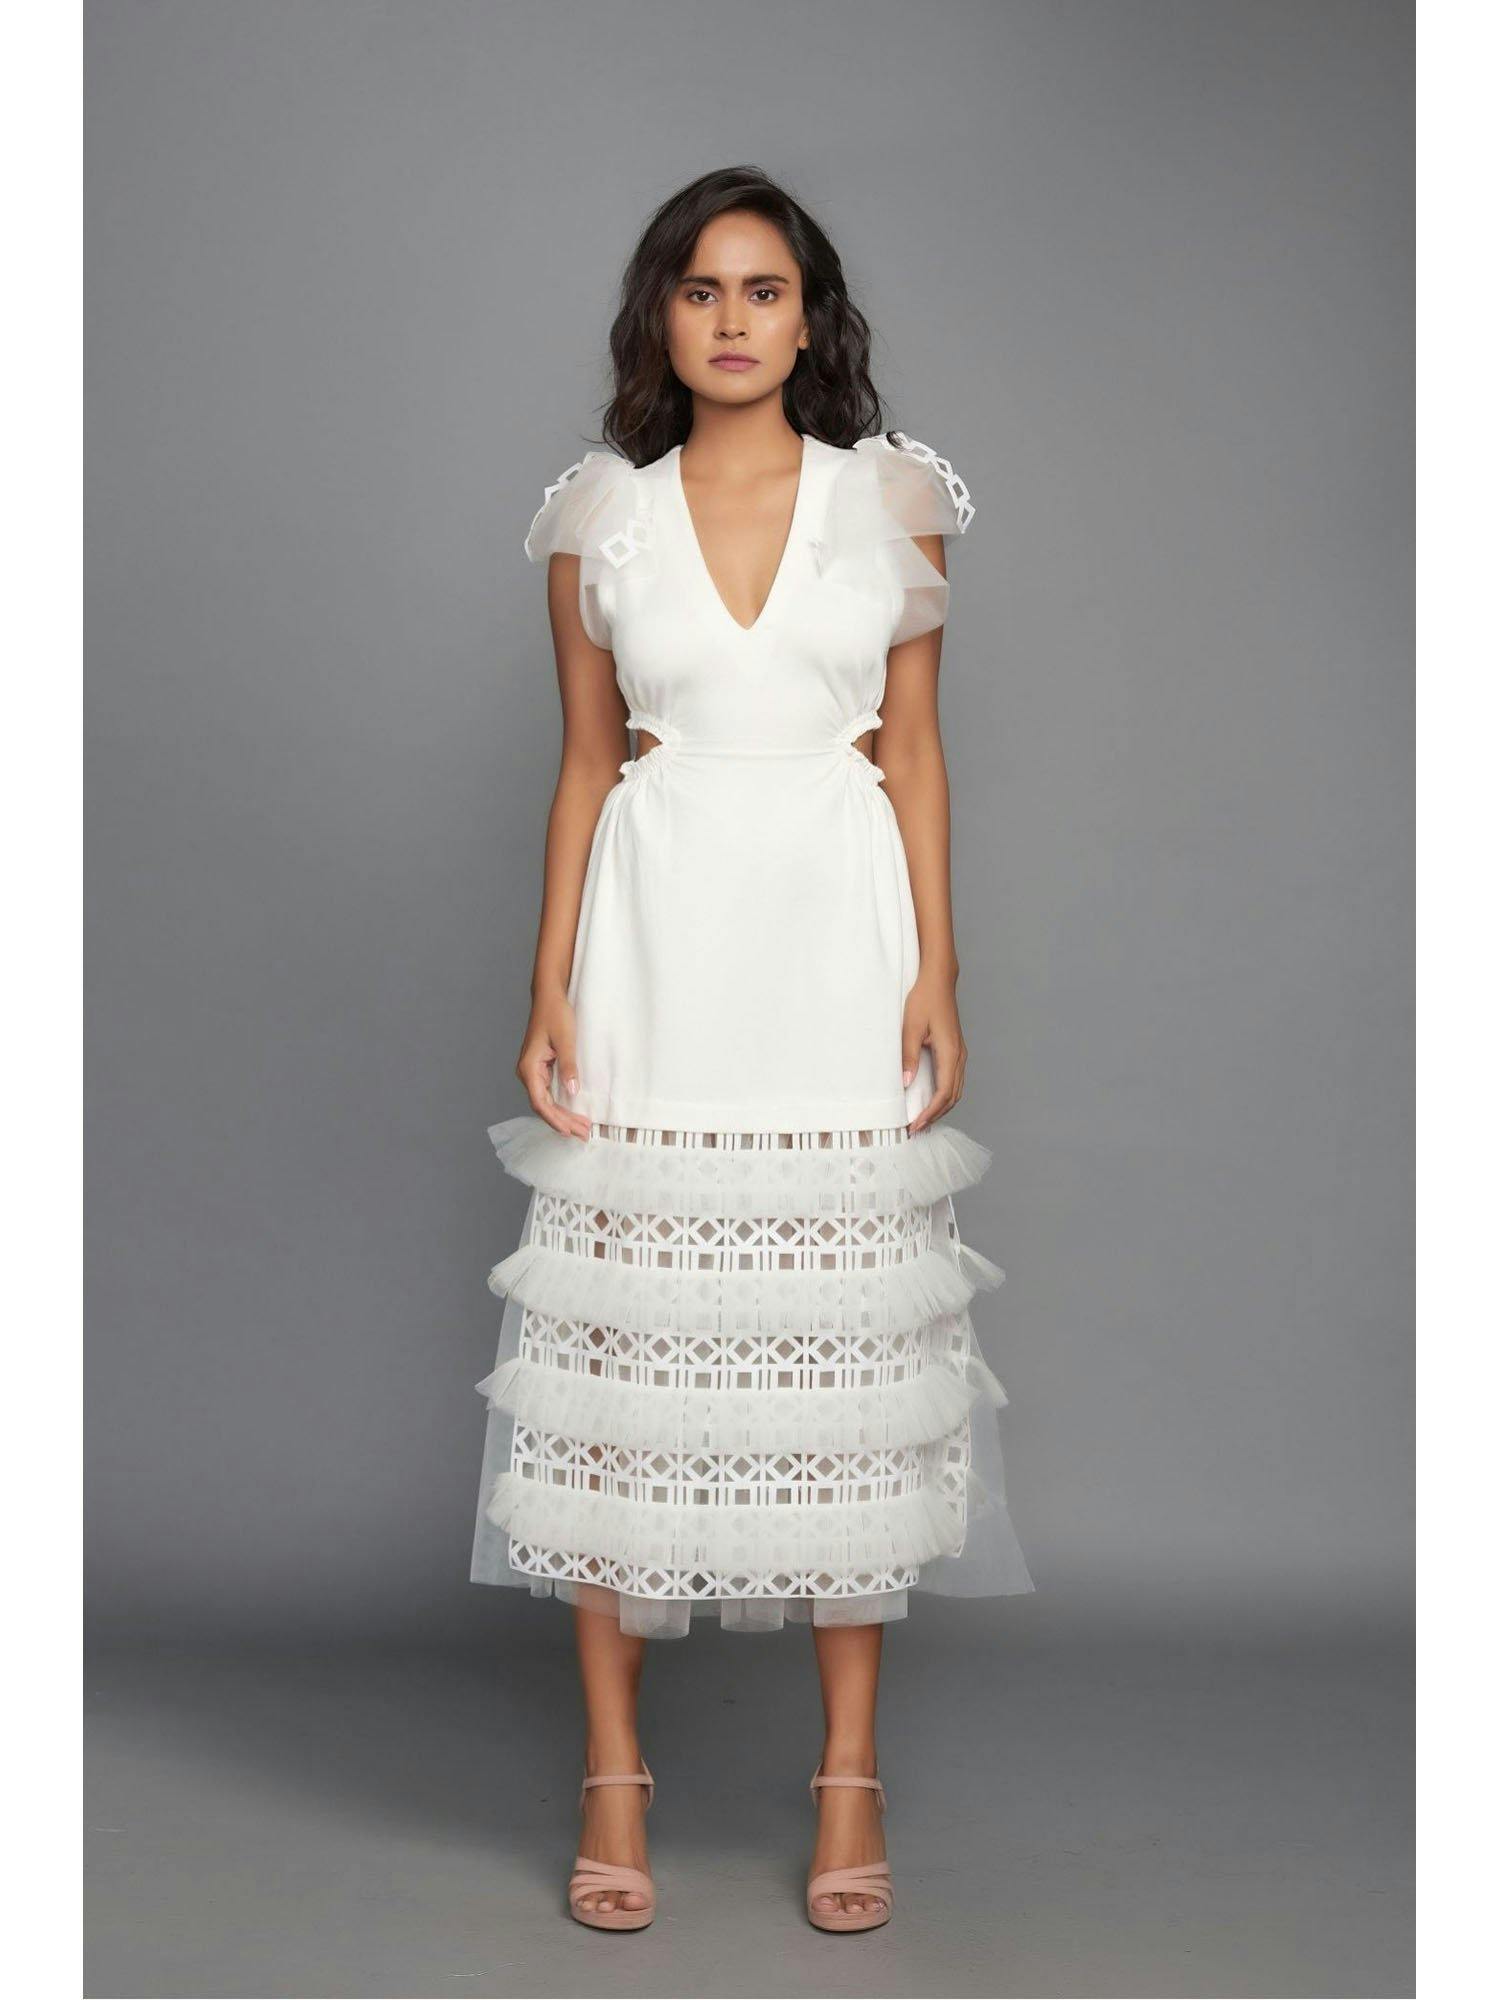 white dress with a cut out at the waist with net pleating, a product by Deepika Arora